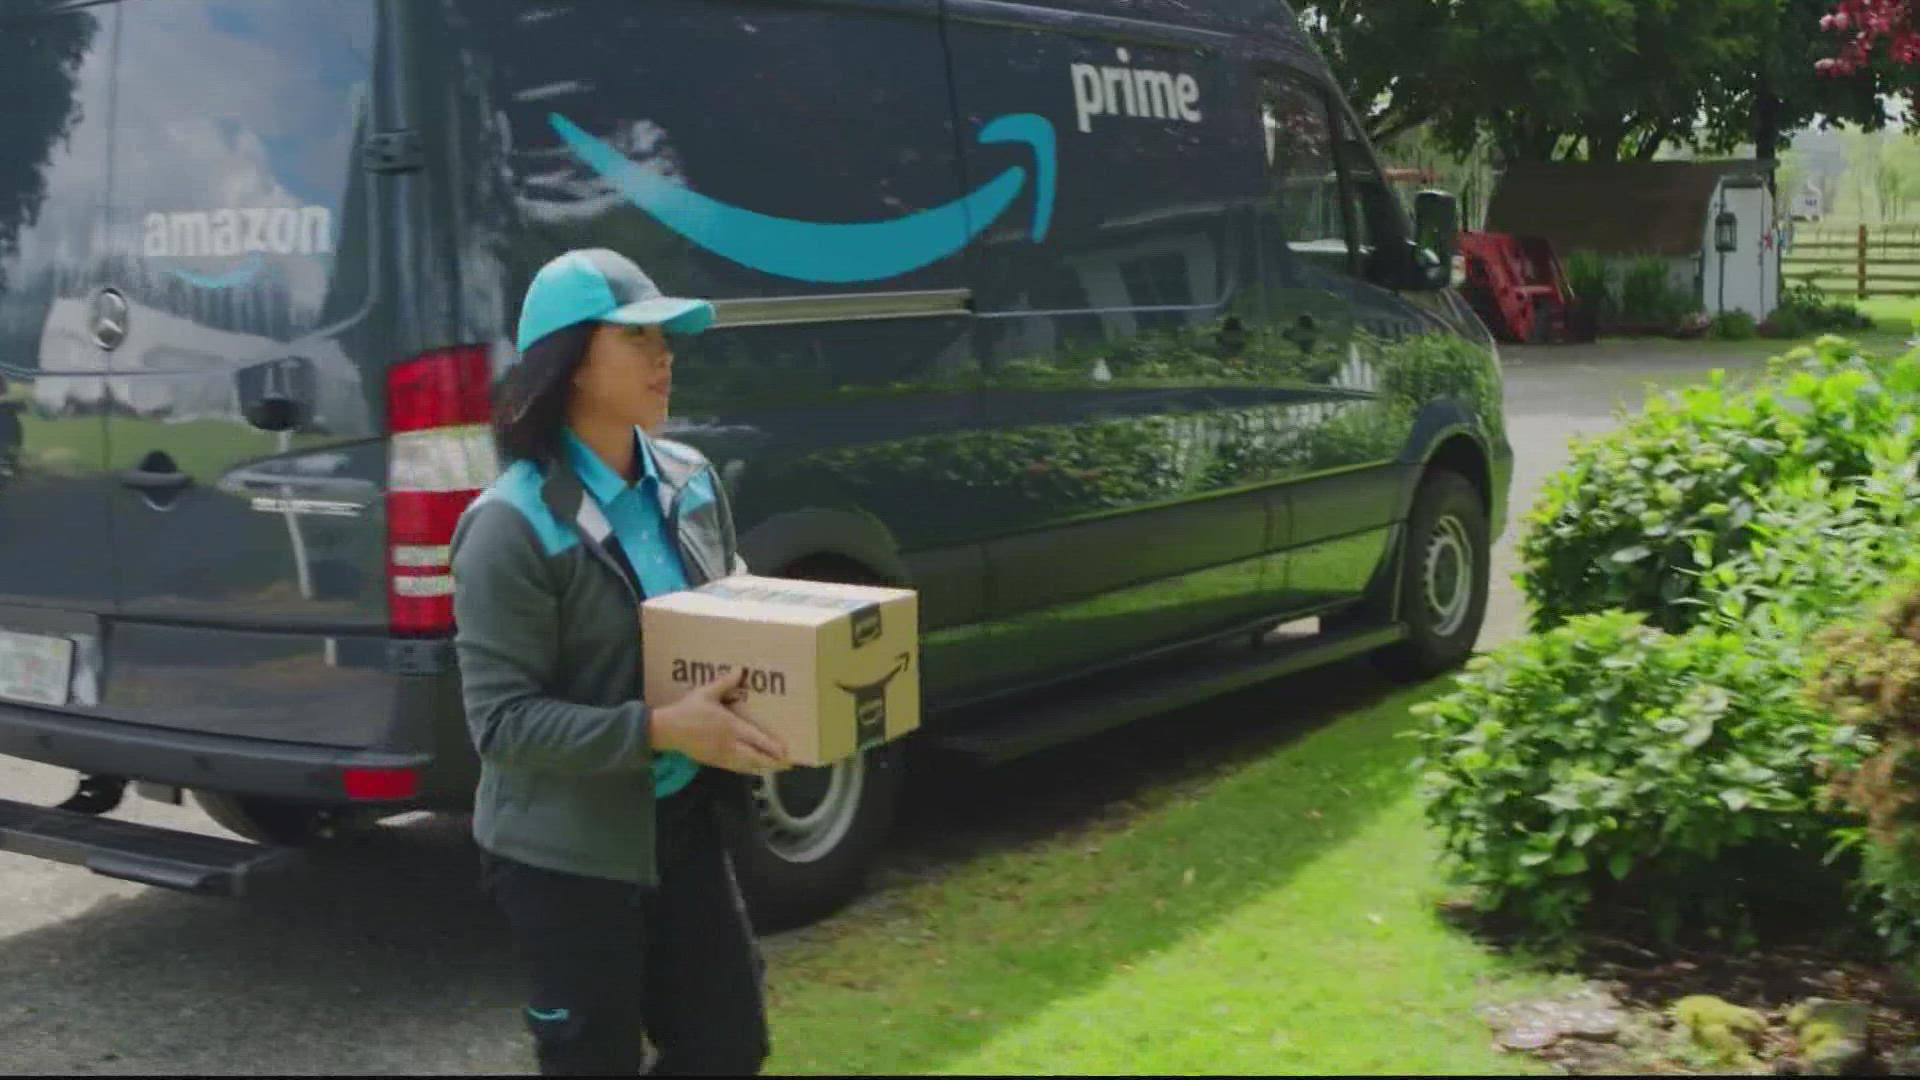 The DC attorney general is suing Amazon, alleging that the company has previously stolen their delivery driver's tips.